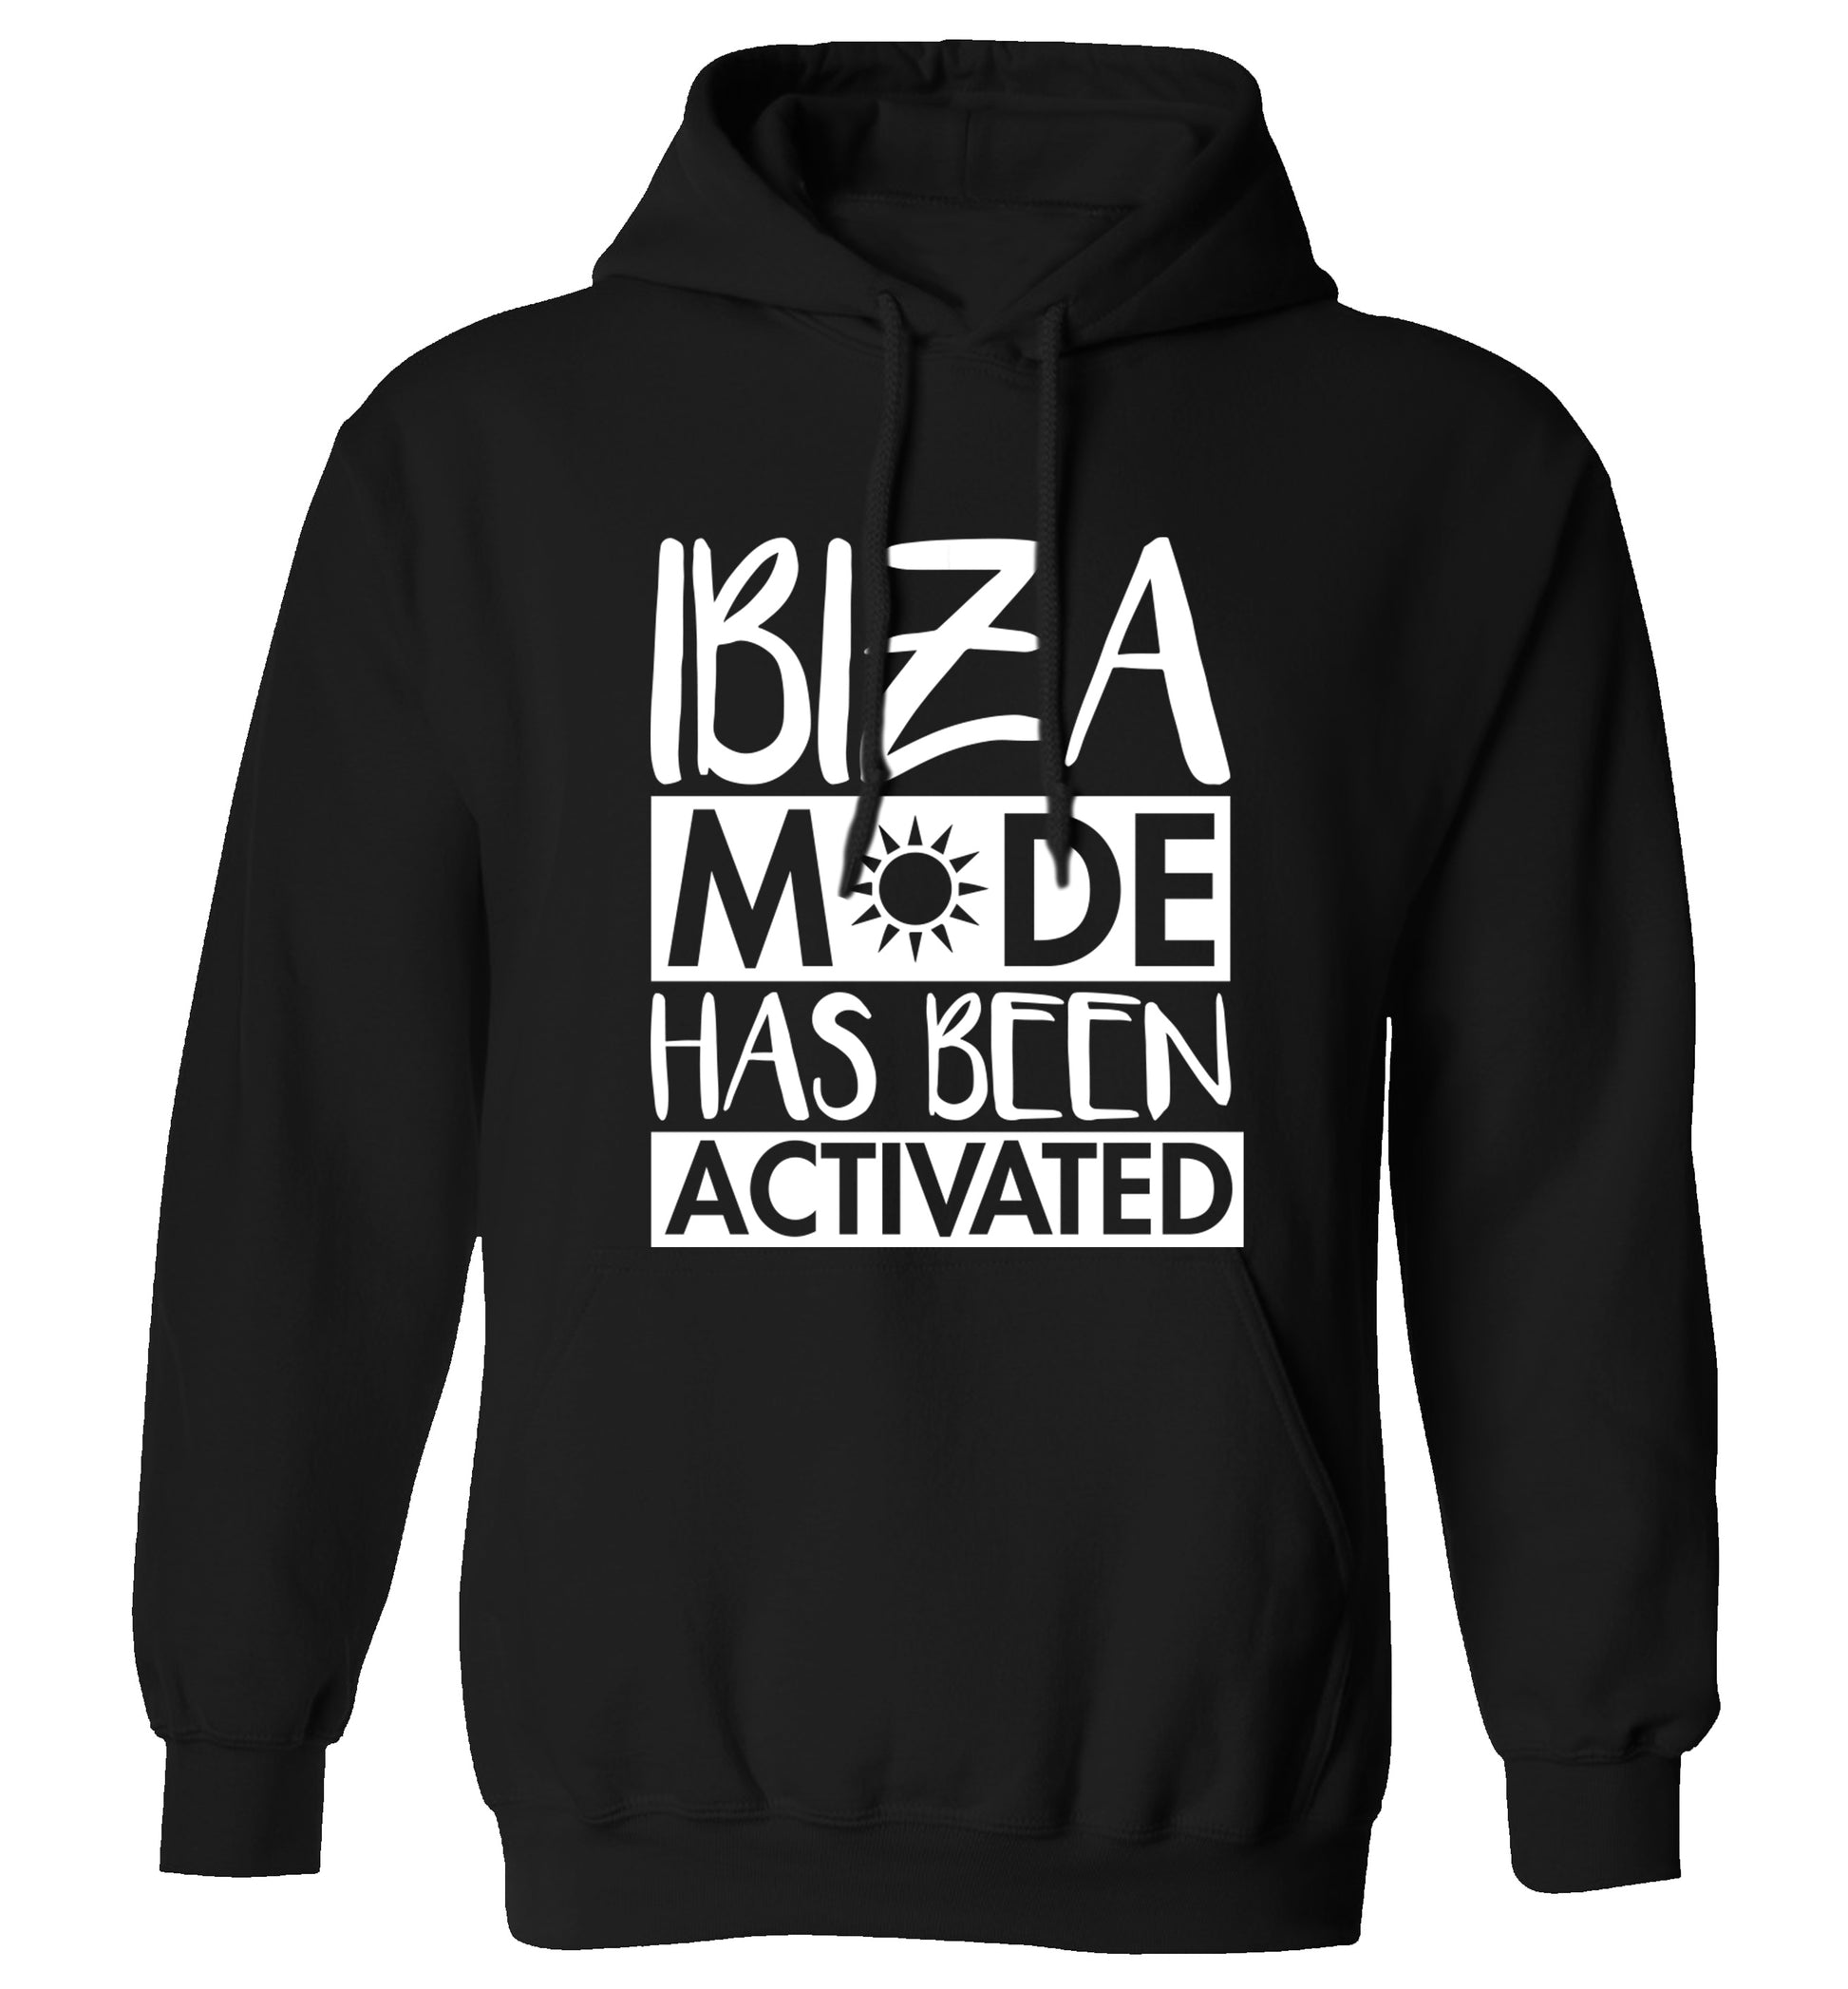 Ibiza mode has been activated adults unisex black hoodie 2XL